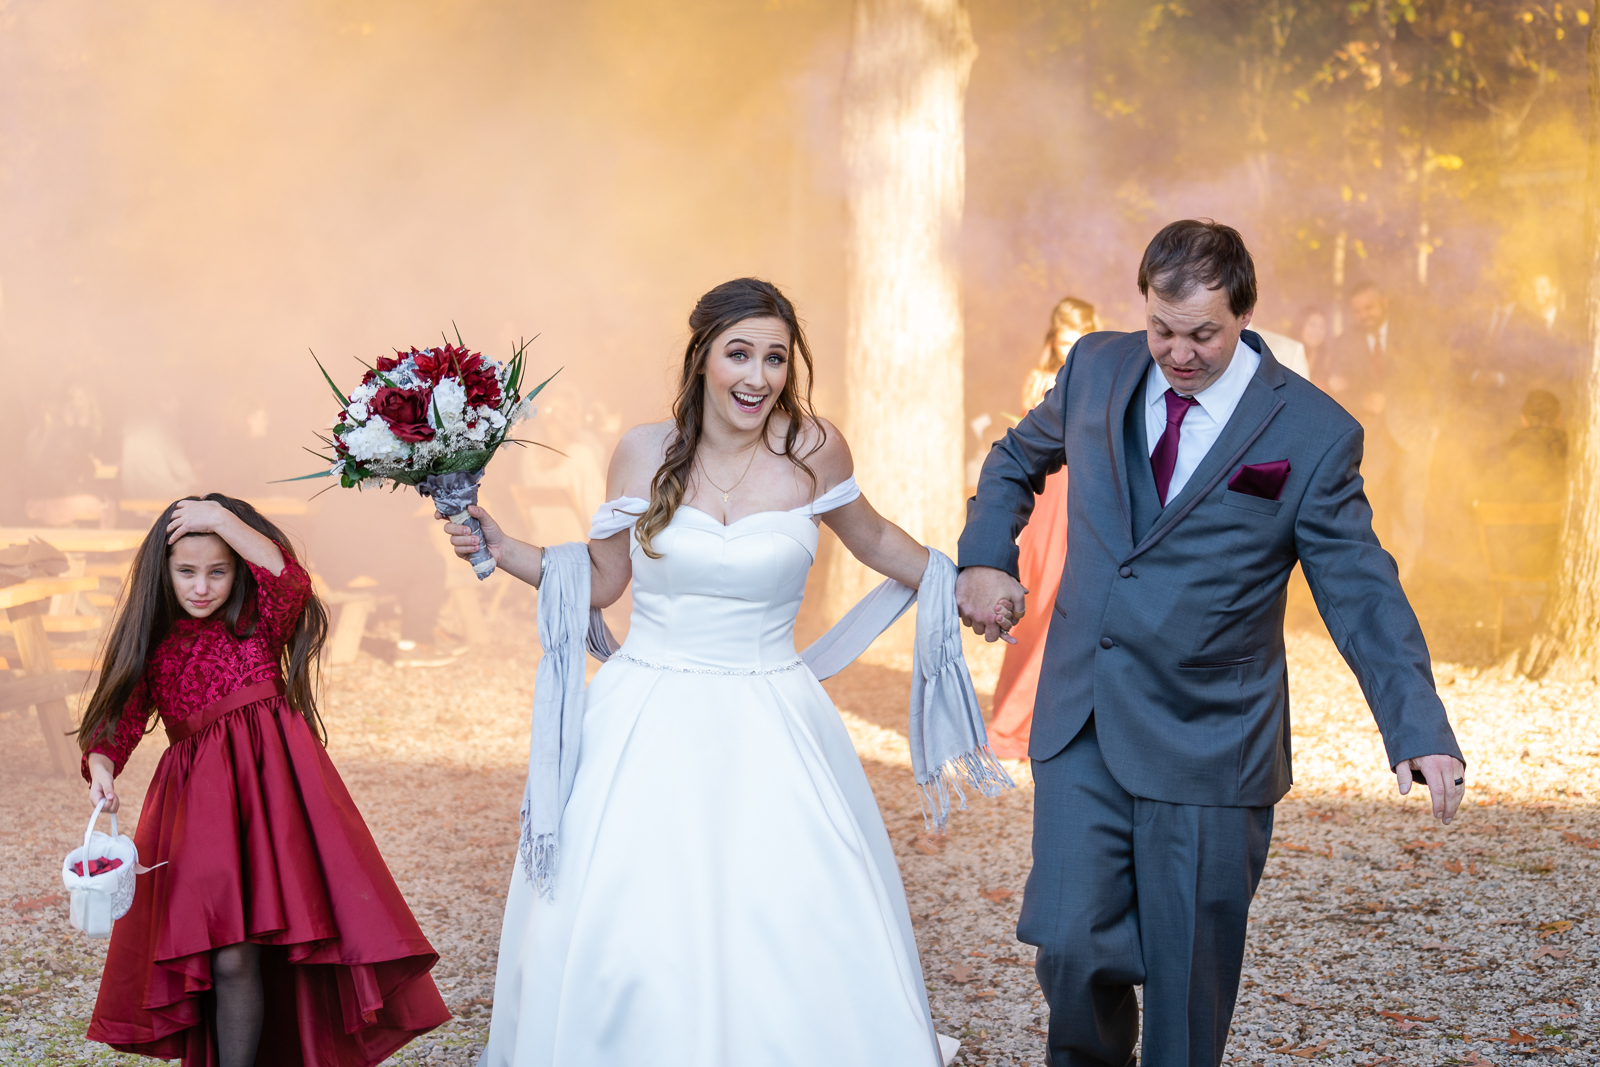 Bride and groom recessional, smoke effect, flower girl, fall wedding, outdoor wedding ceremony at German Central Organization